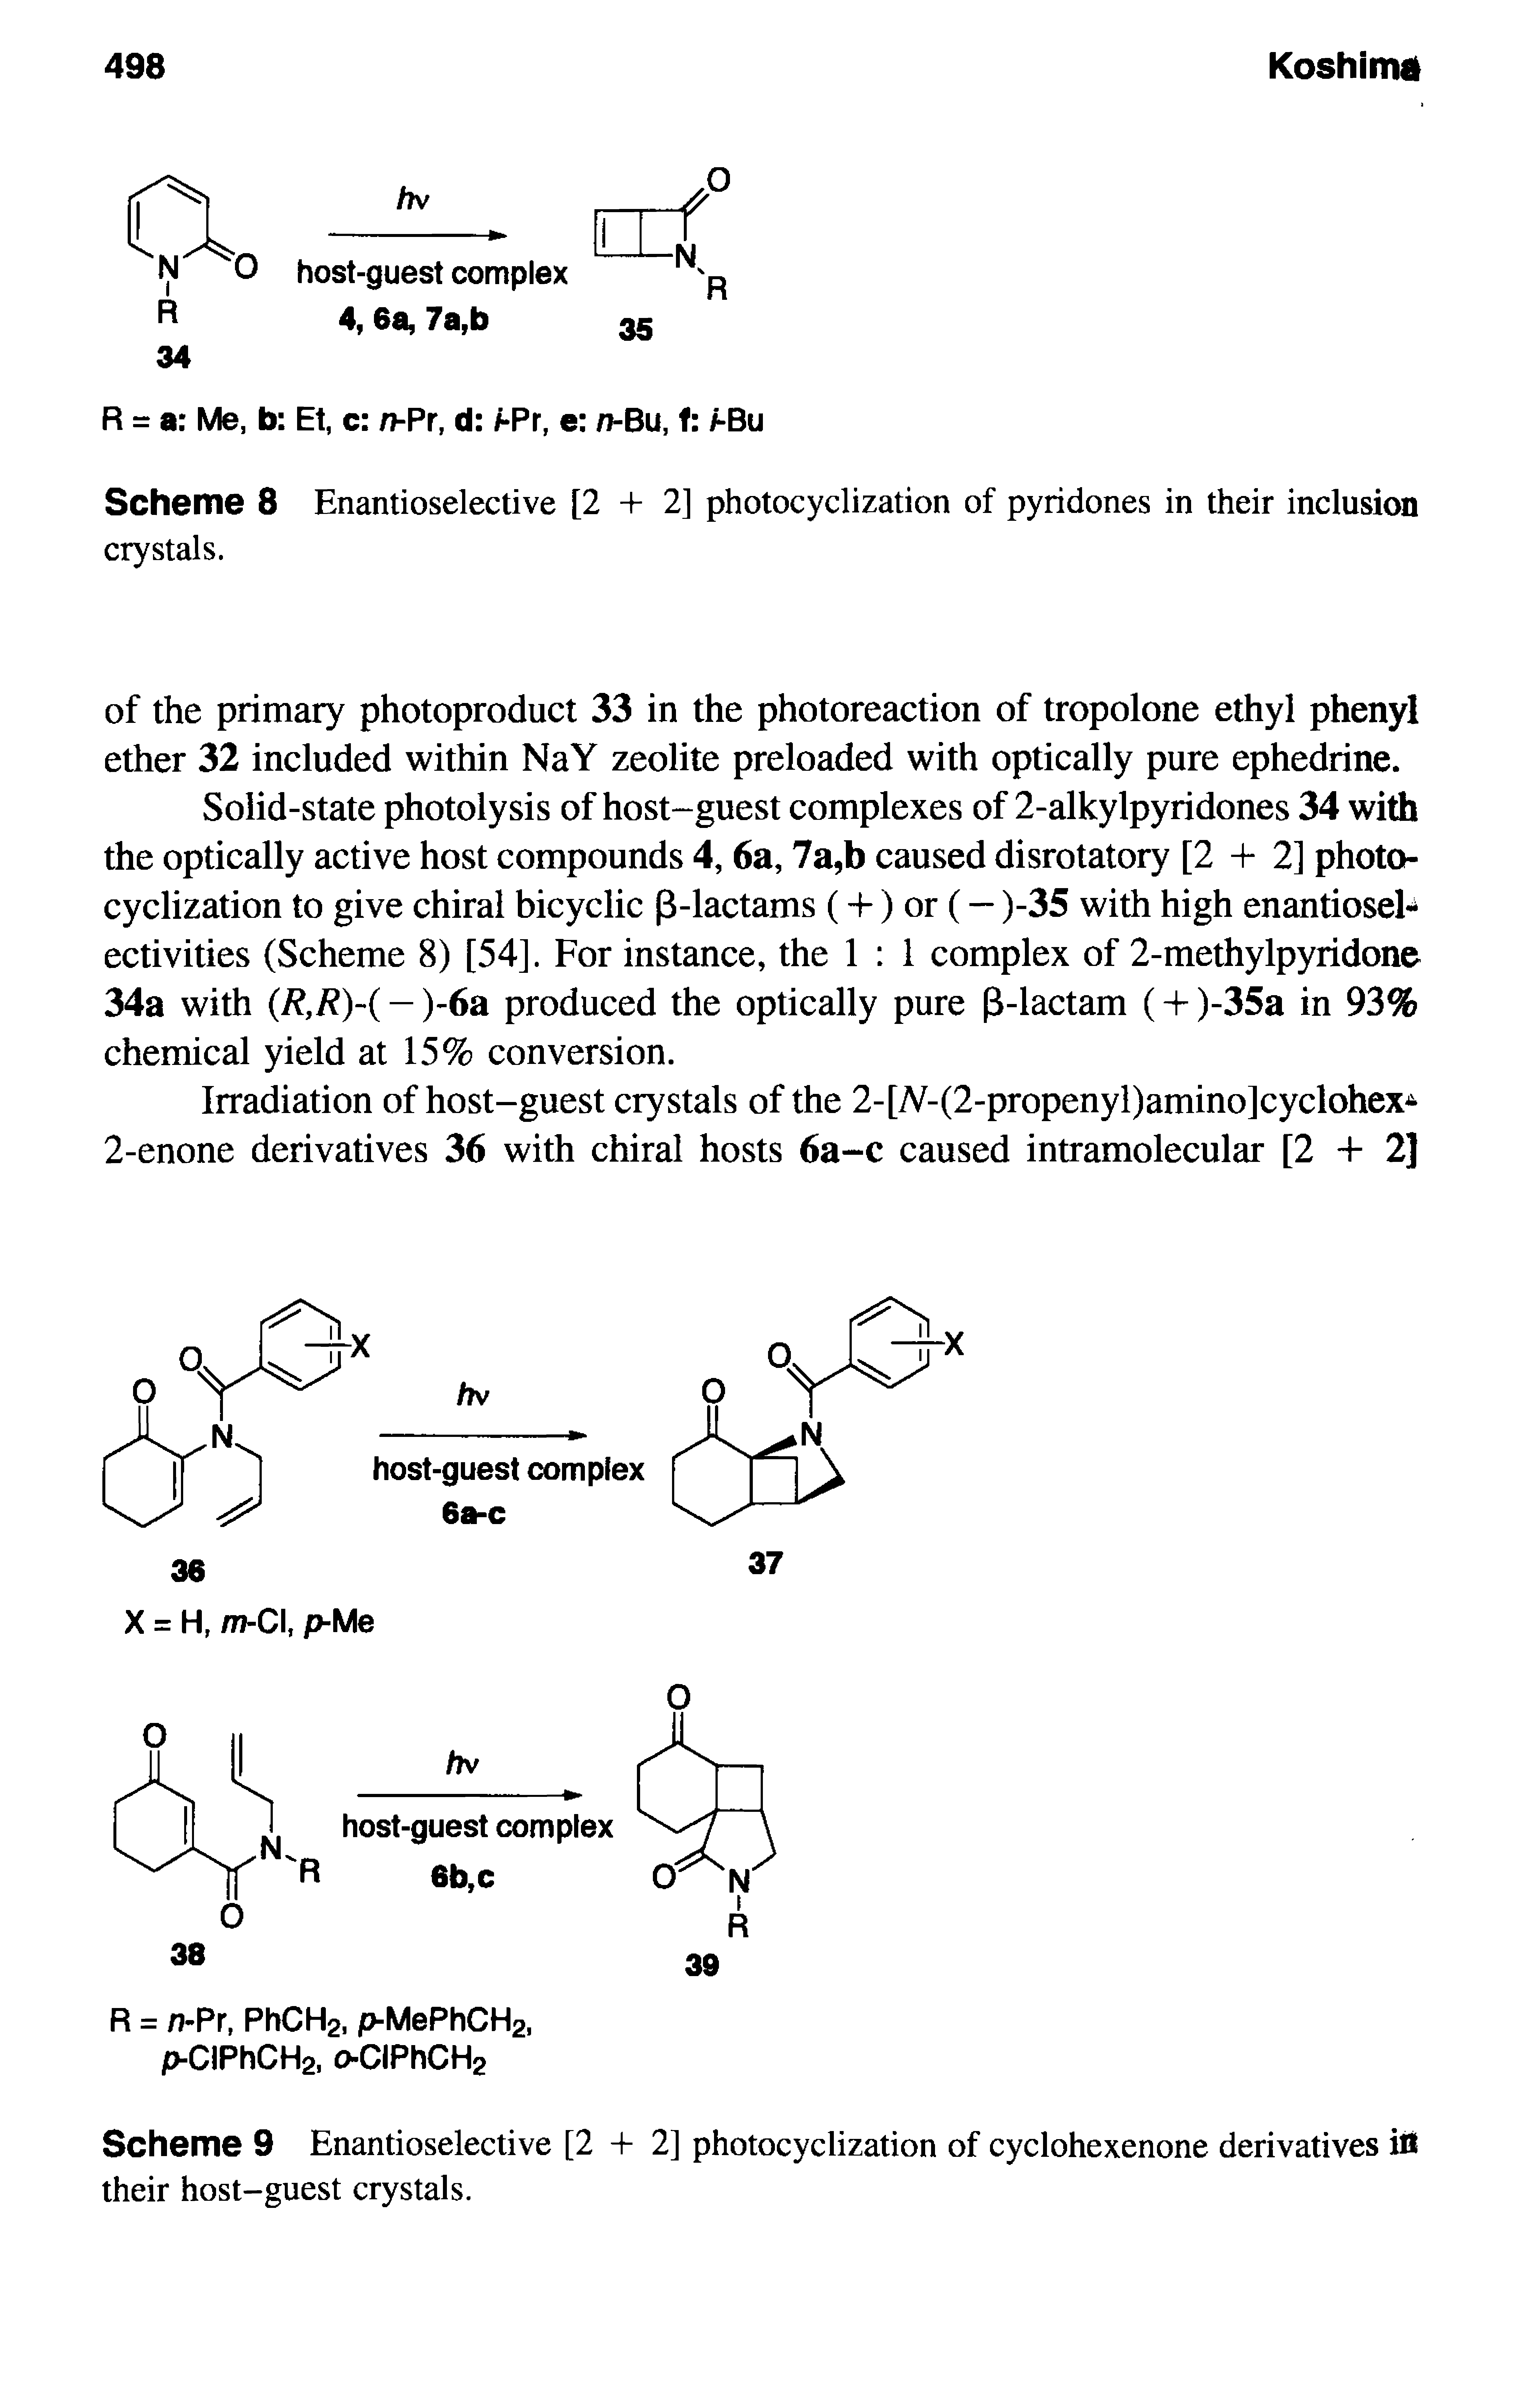 Scheme 8 Enantioselective [2 + 2] photocyclization of pyddones in their inclusion crystals.